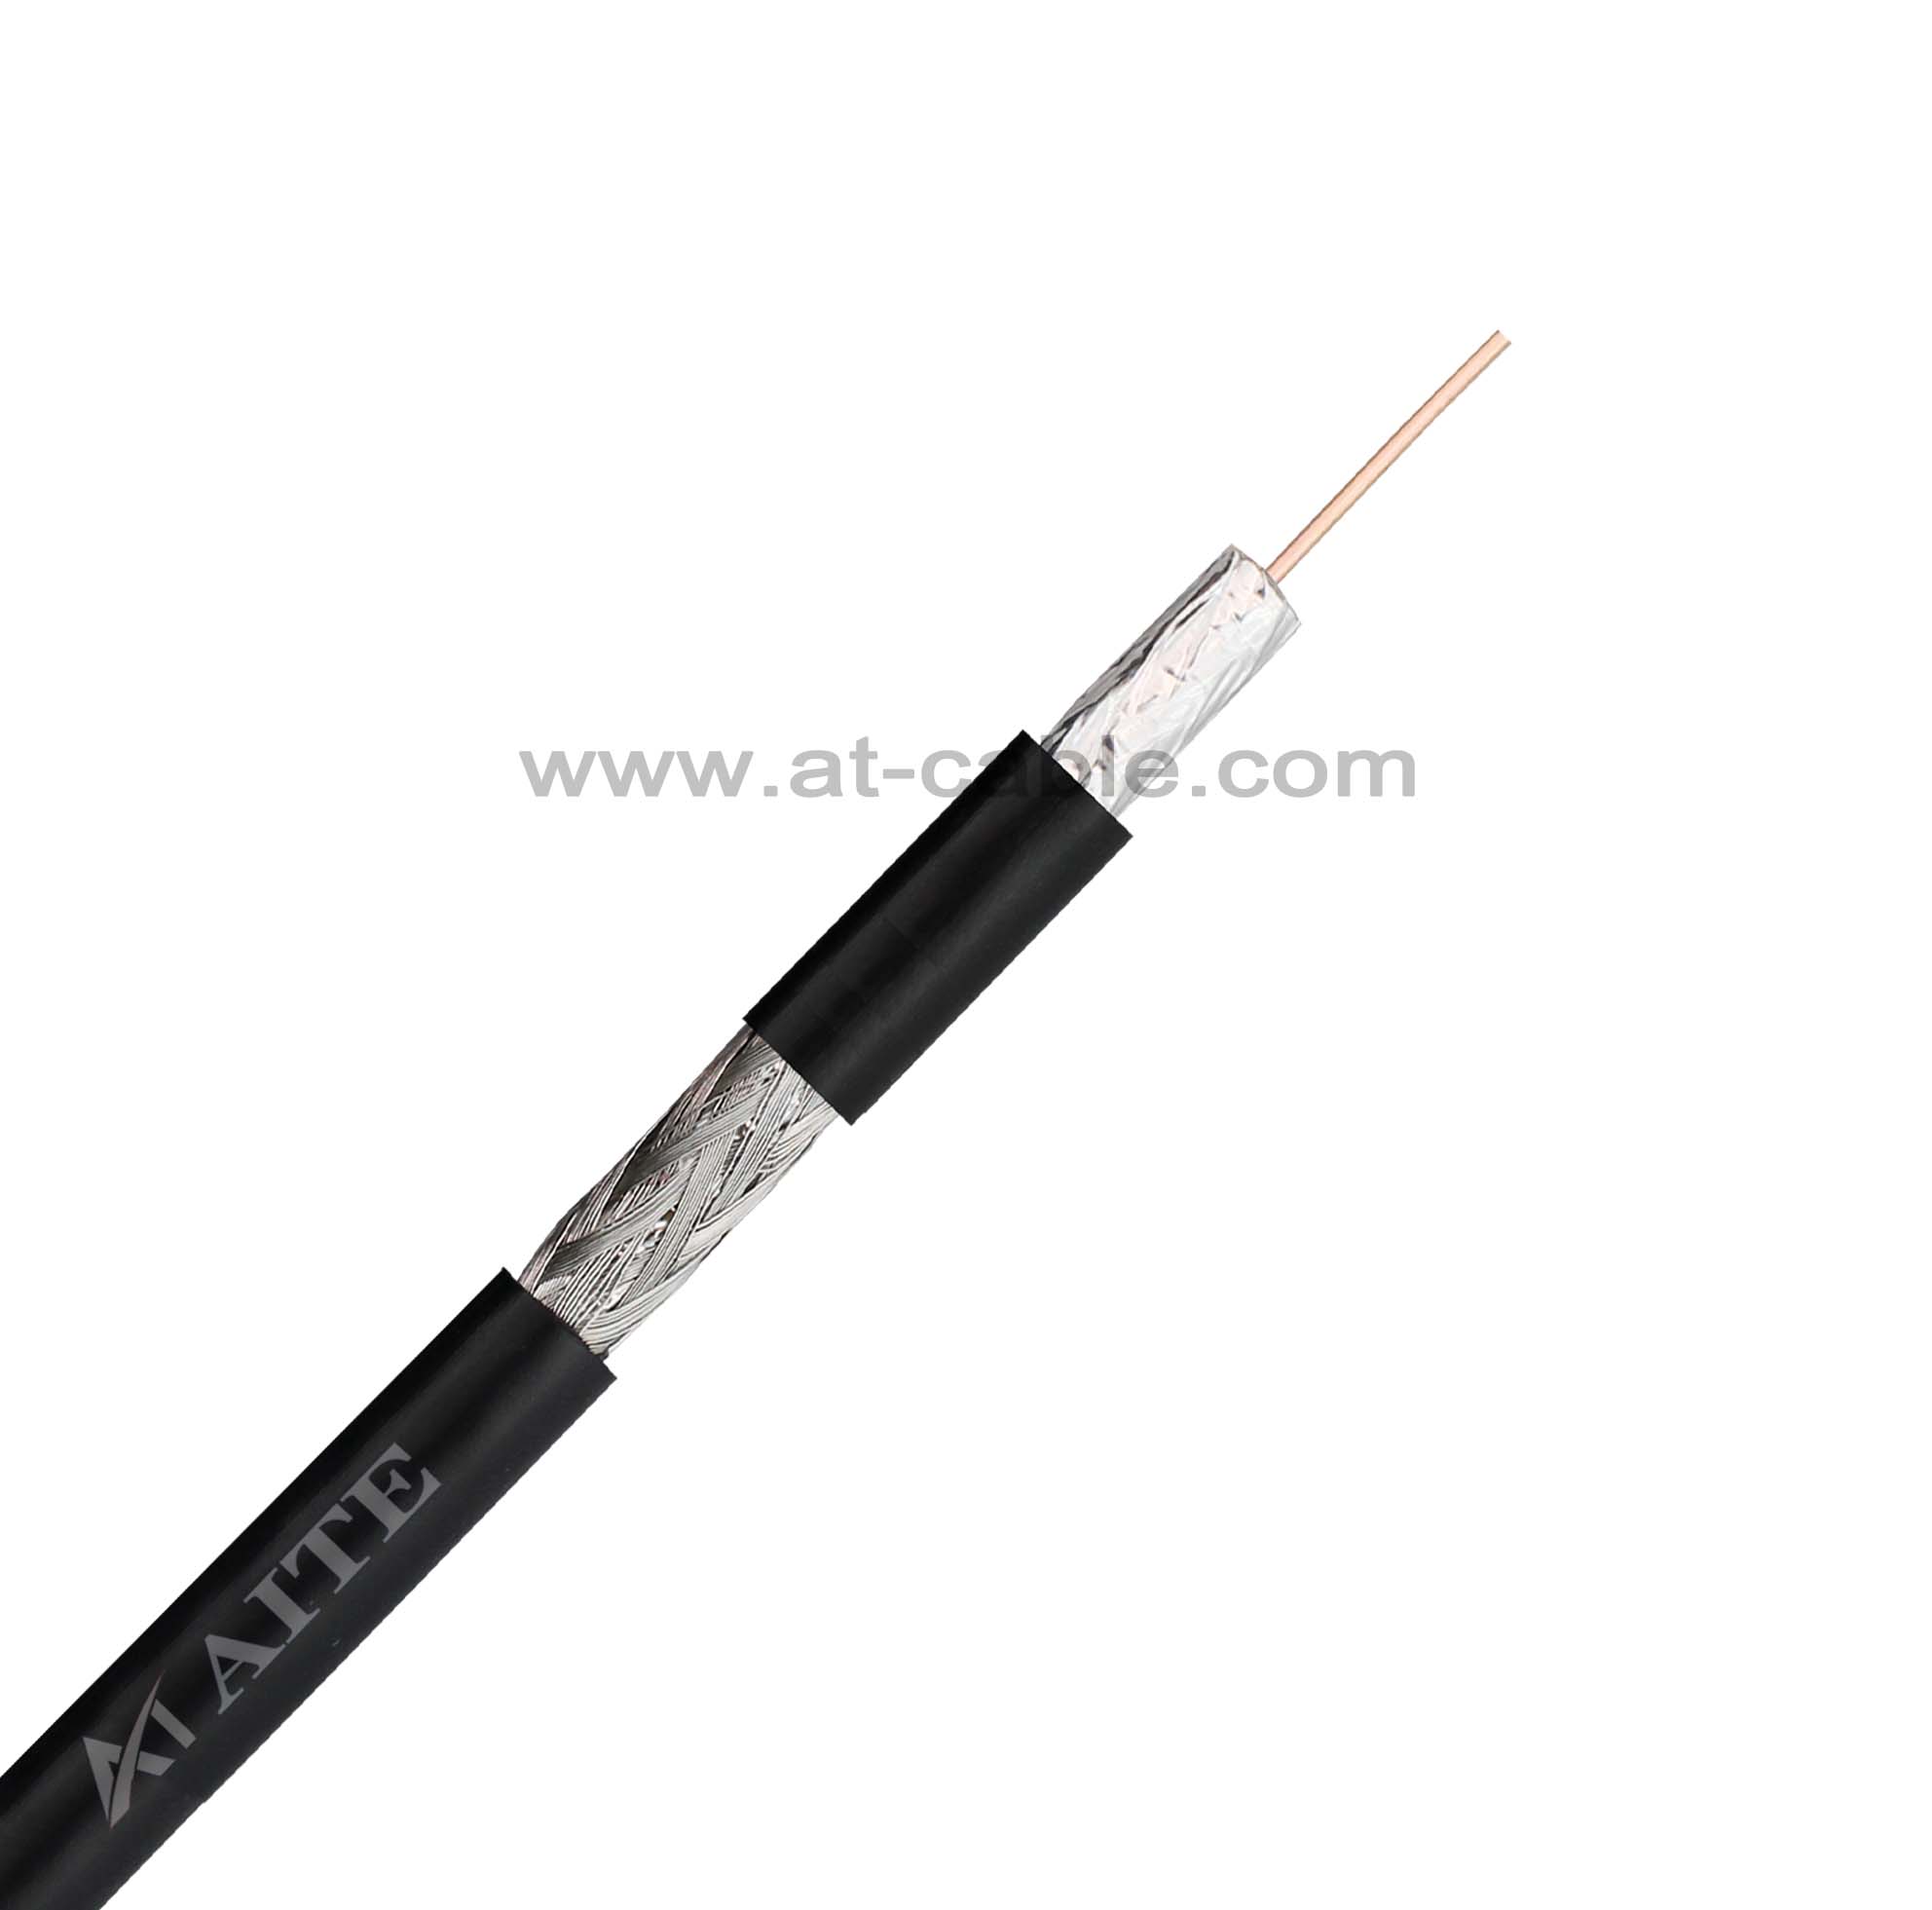 RG59 Standard Coaxial Cable